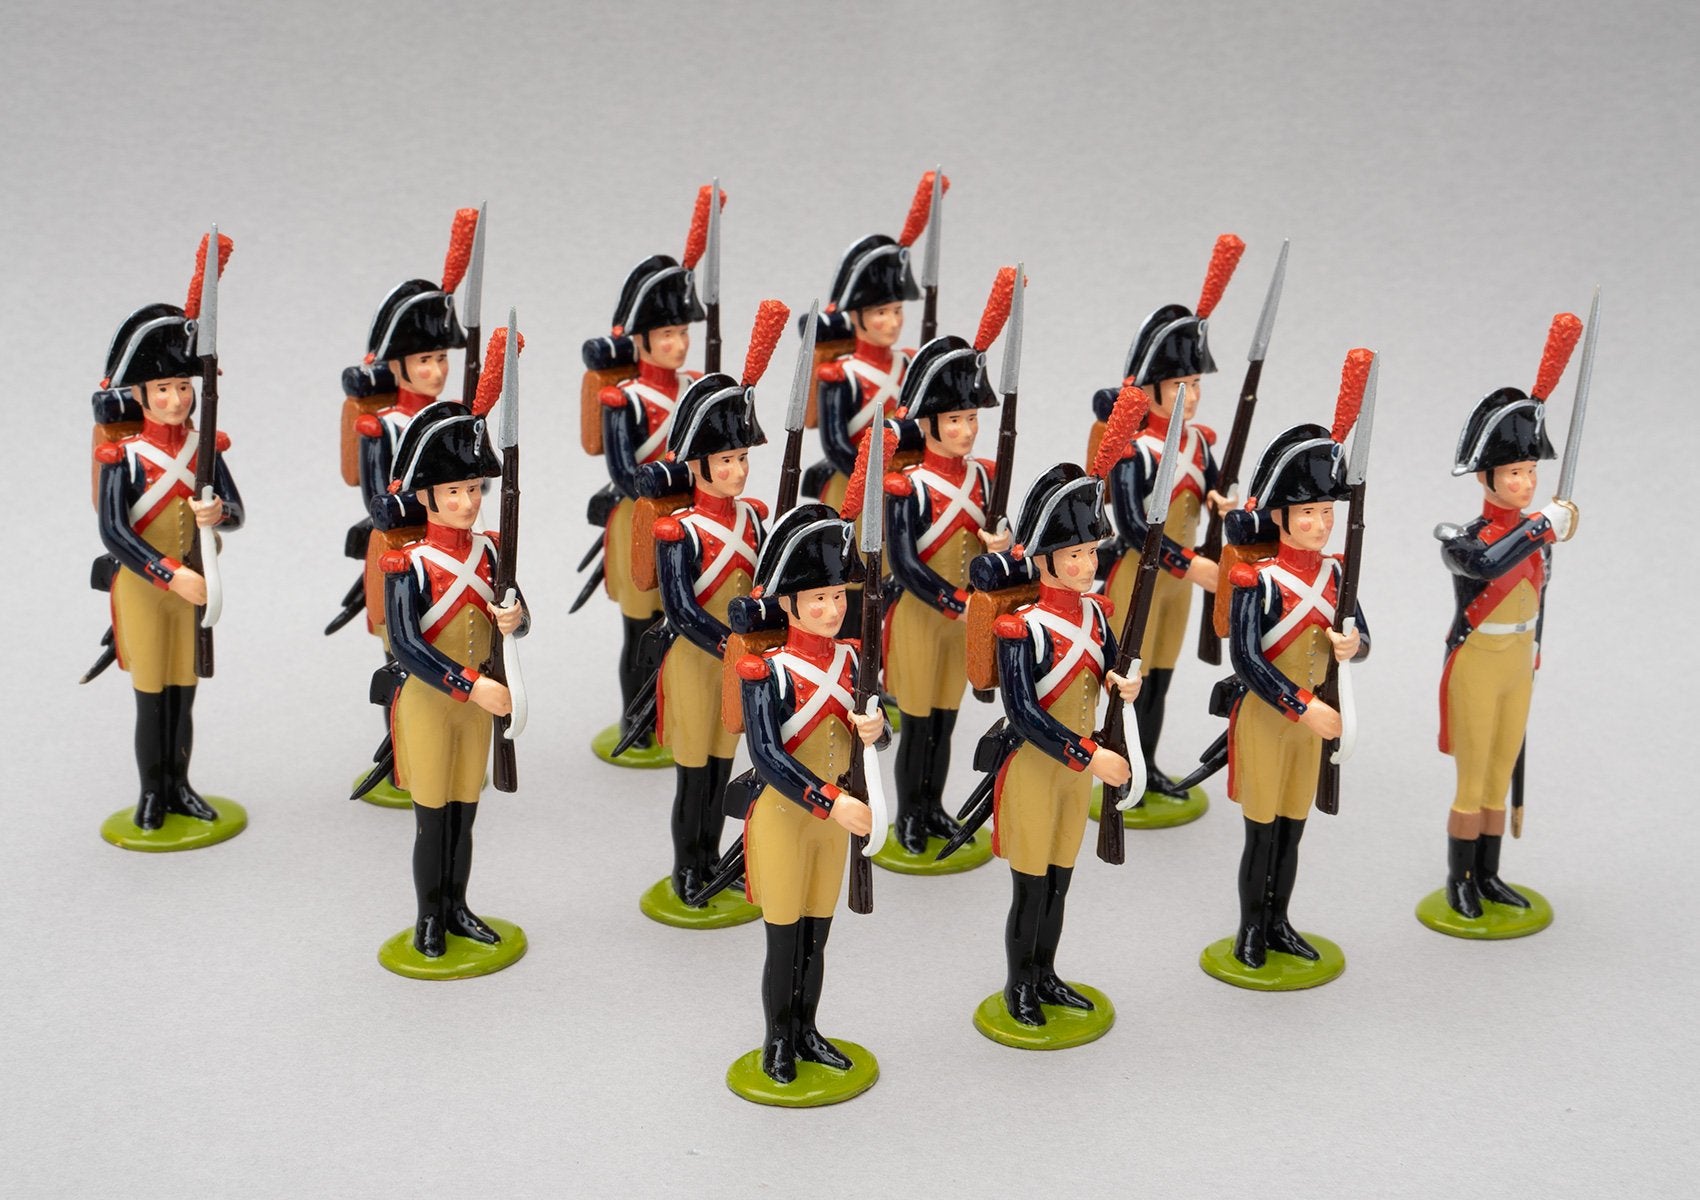 Set 111a Gendarmerie Impériale | French Infantry | Napoleonic Wars | Six men, all at the present arms position their short muskets with bayonets fixed | Waterloo | © Imperial Productions | Sculpt by David Cowe